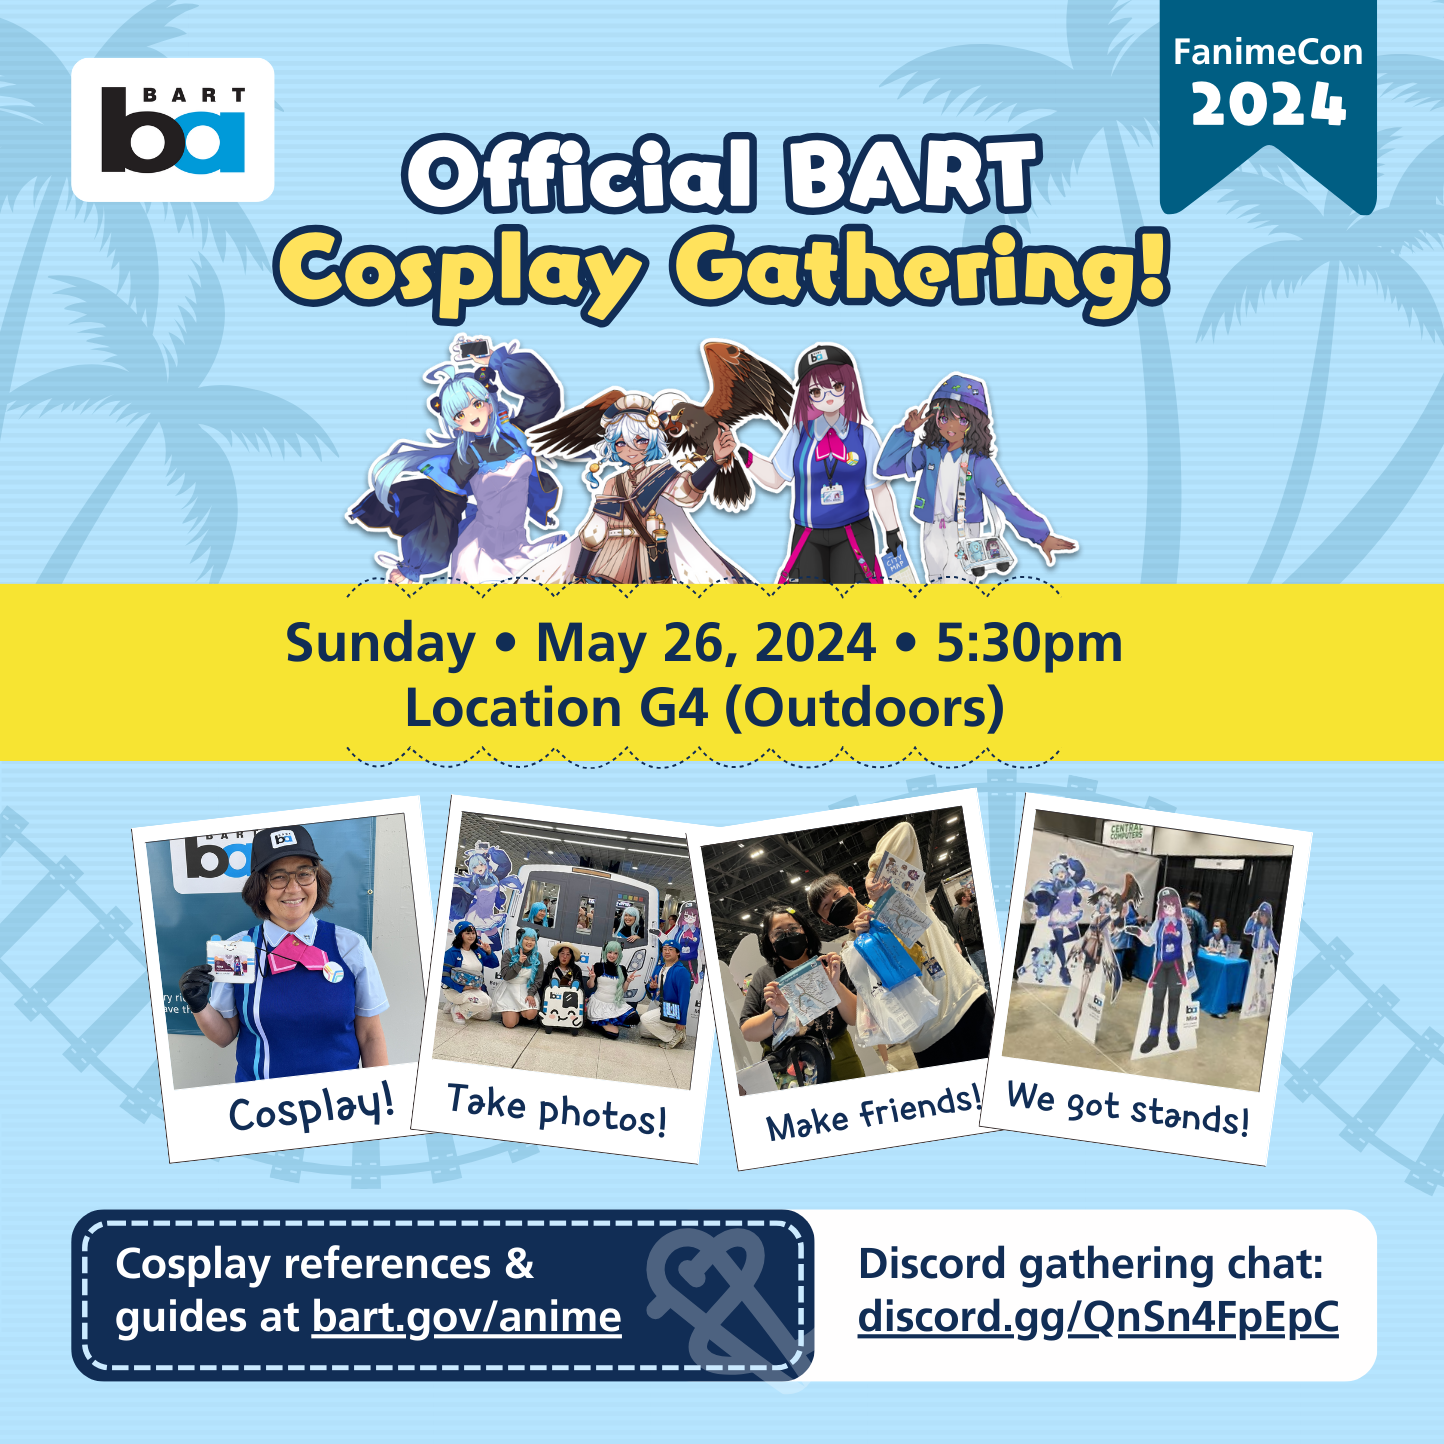 There is an Official BART Cosplay Gathering on Sunday, May 26, 2024, 5:30pm at gathering location G4. Gathering location G4 is outdoors, in the main plaza facing San Carlos Street, near the Marriott hotel side. Come for cosplay (depicted as a photo of a Mira cosplayer holding up her badge), make friends (depicted as a photo of two people holding up BART gear together), and take photos (depicted as a group cosplay photo!) We will also bring our life size stands (depicted as a photo of our FanimeCon 2023 table.) Discord gathering chat server is QnSn4FpEpC (case sensitive.) Cosplay references & guides at bart.gov/anime. There is also a cosplay discount on May 24-27, 2024 for in-person purchases at the BART FanimeCon table. Get 15% off your entire purchase for coming in cosplay of the BART mascots. Get 5% your entire purchase for coming in cosplay of other transit mascots or fictional railway crew. Cosplayer must be present. Full text at bart.gov/anime.